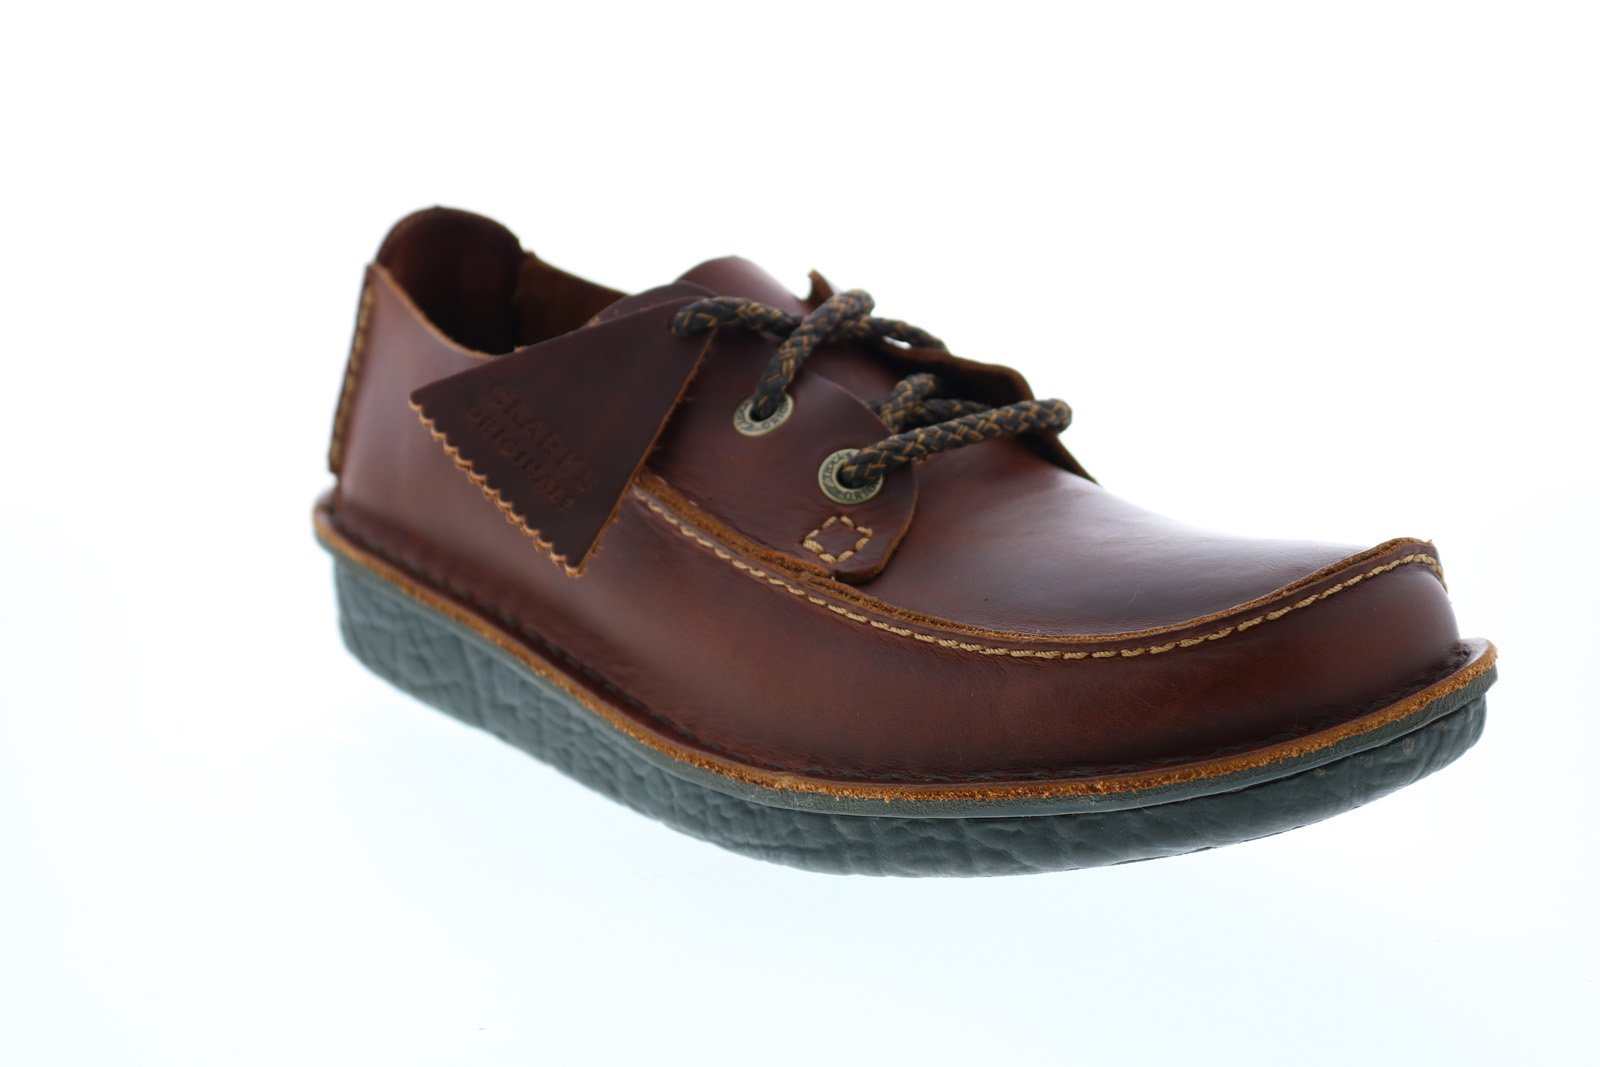 Mens Clarks Pasty Shoes | susihomes.com